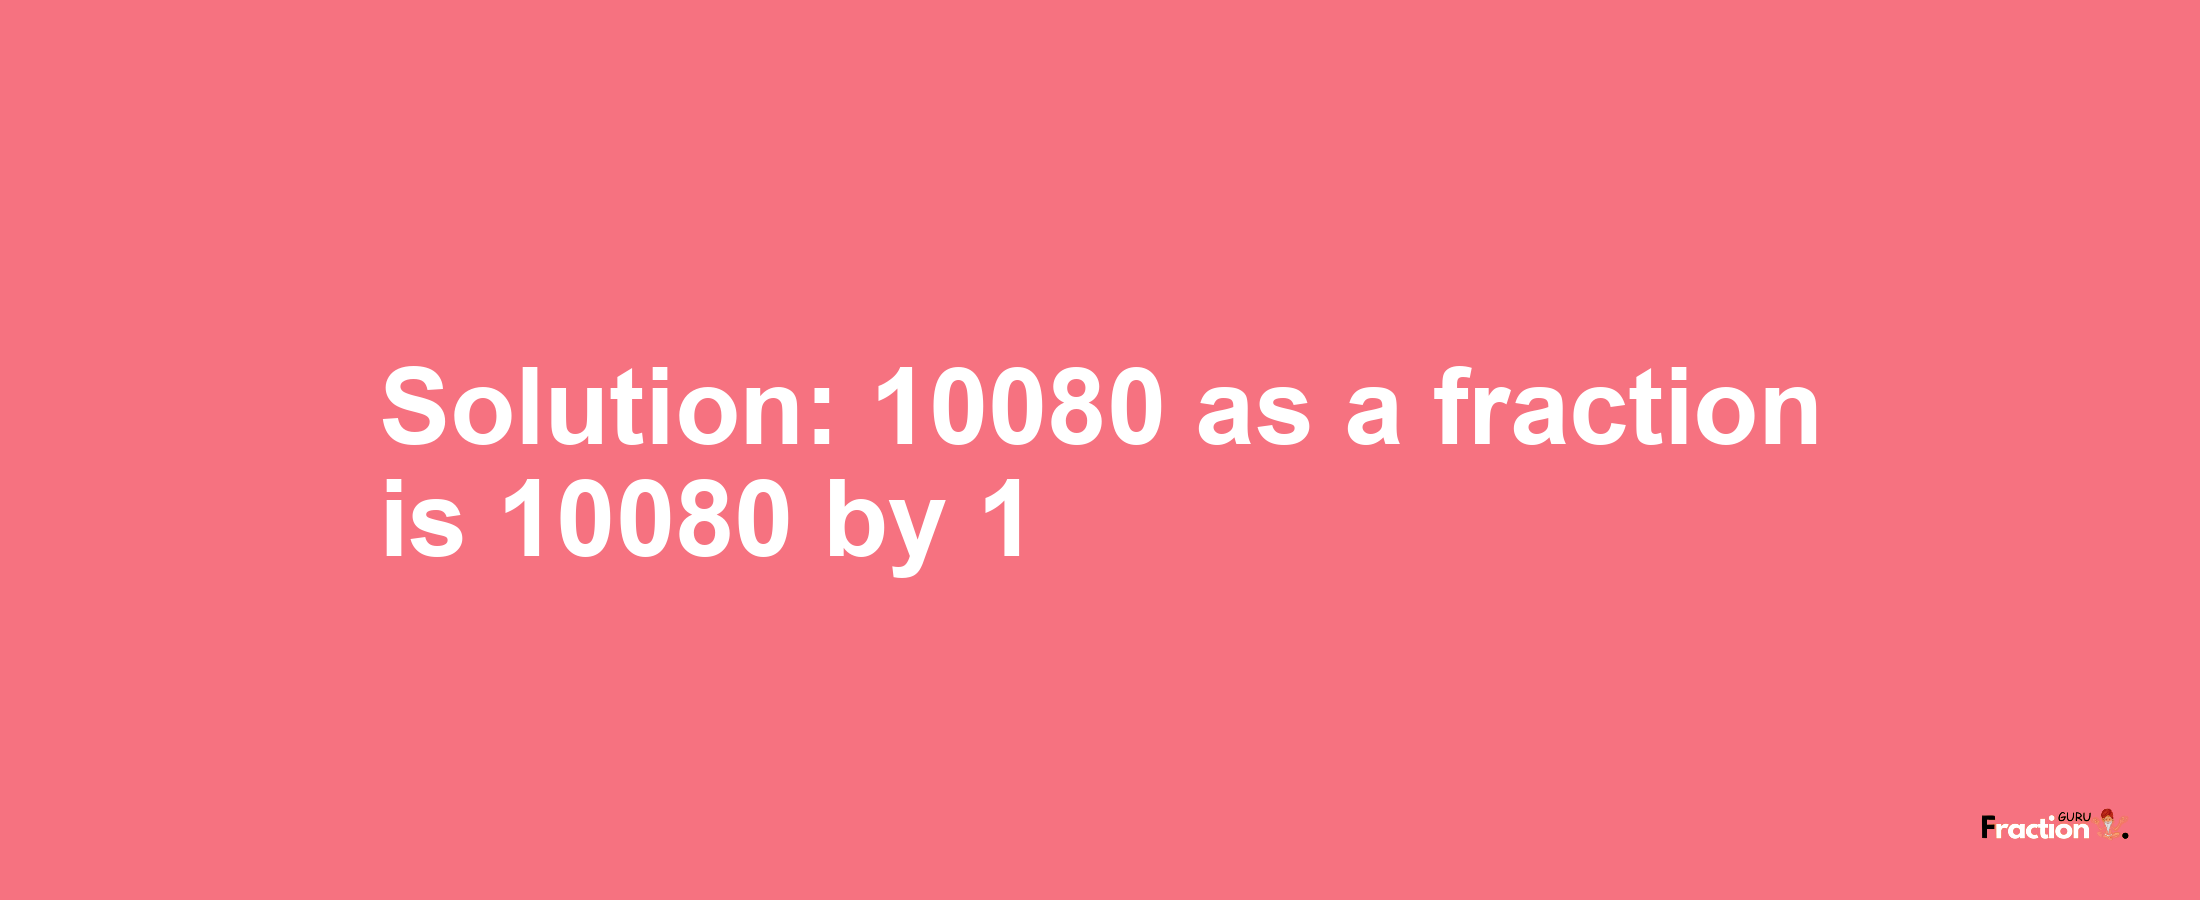 Solution:10080 as a fraction is 10080/1